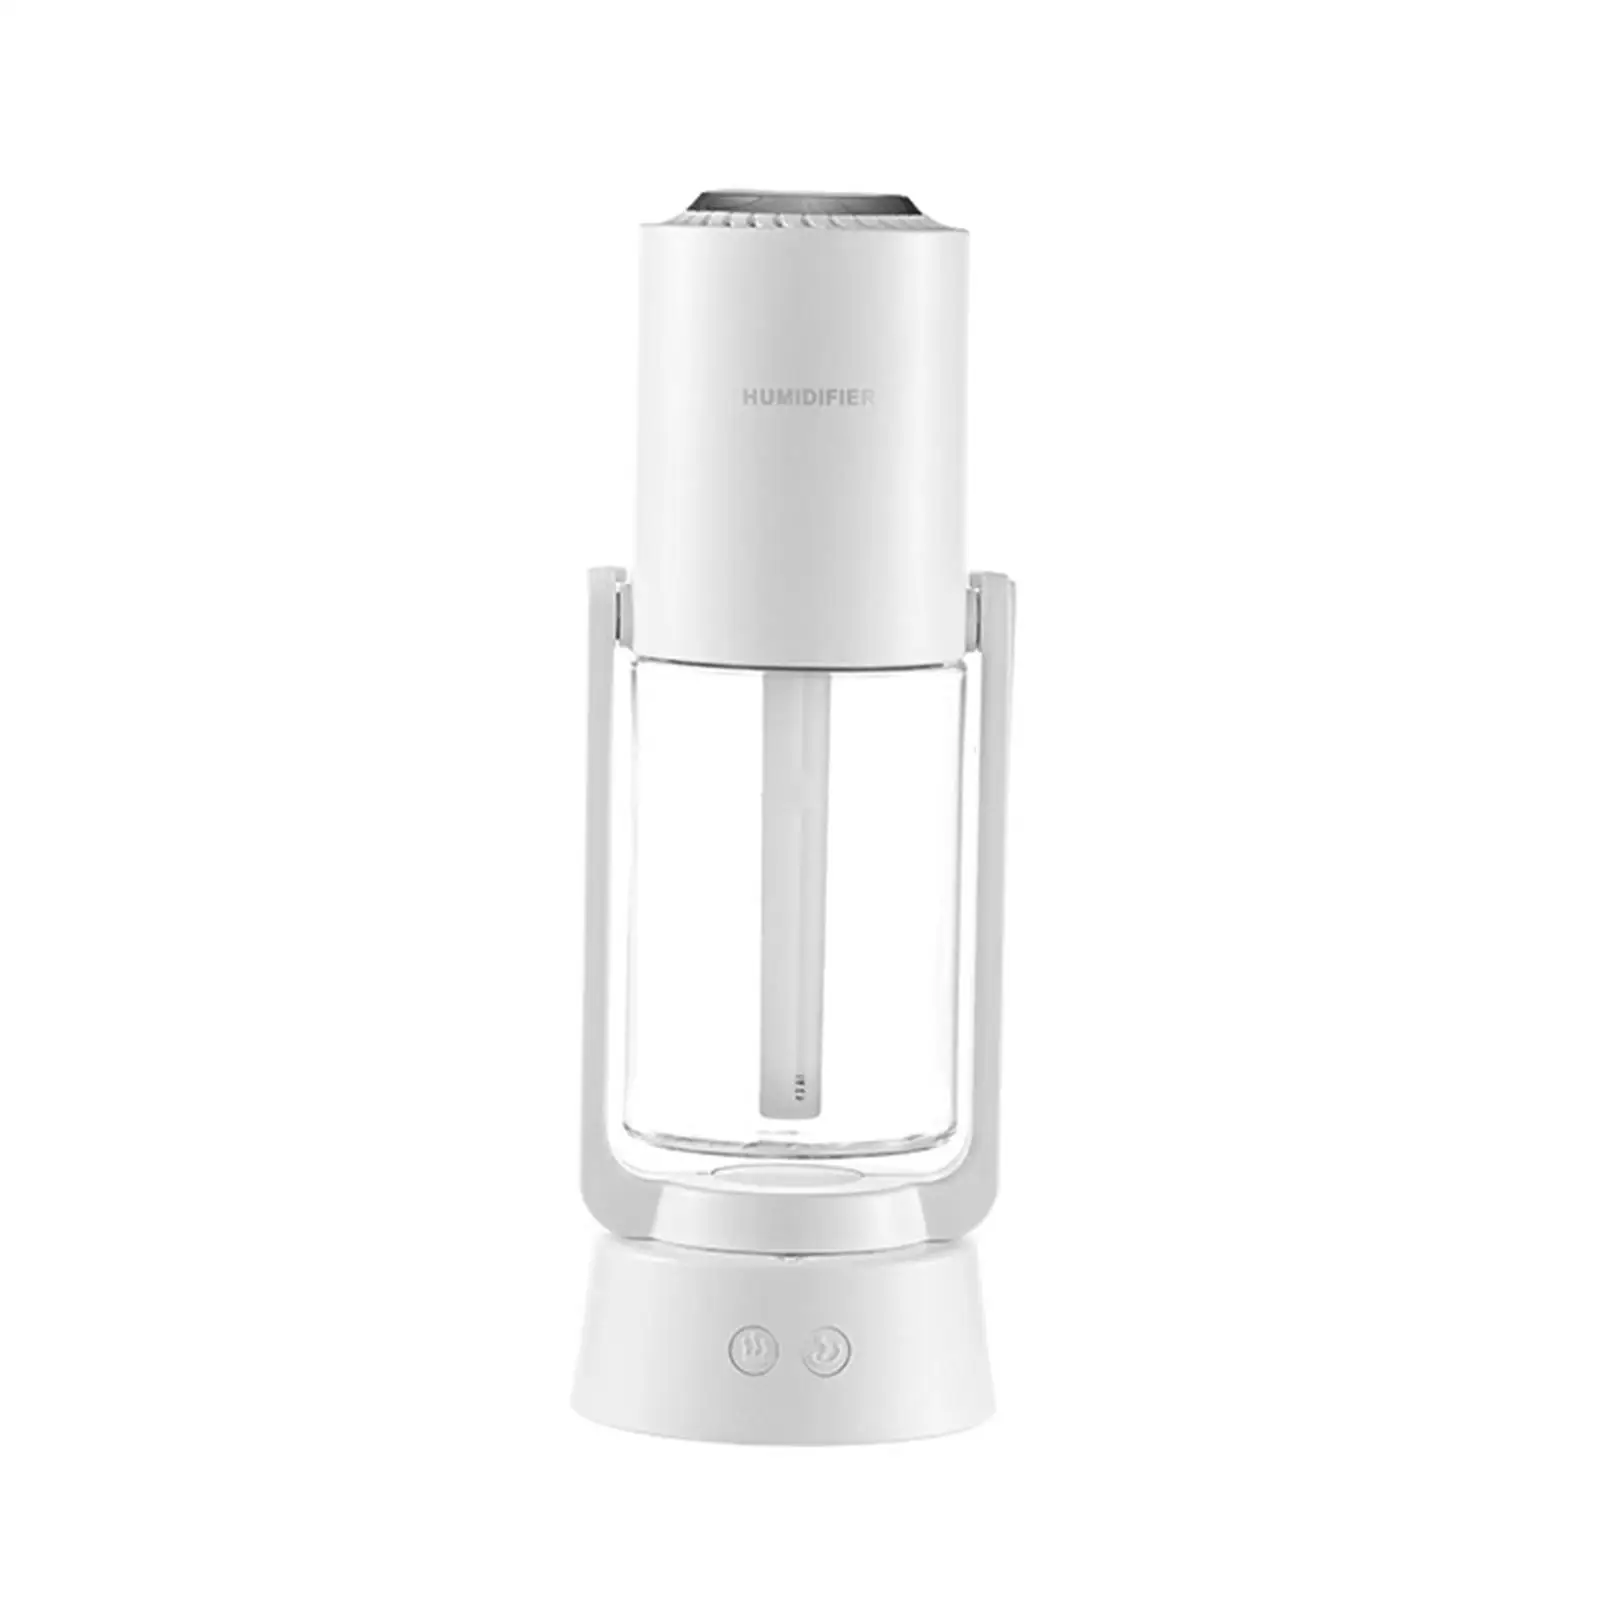 Essential Oil Diffusers Ambient Light Settings 120 180 Rotary Adjustable 2 Mode Mist Air Humidifier for Home Spa Personal